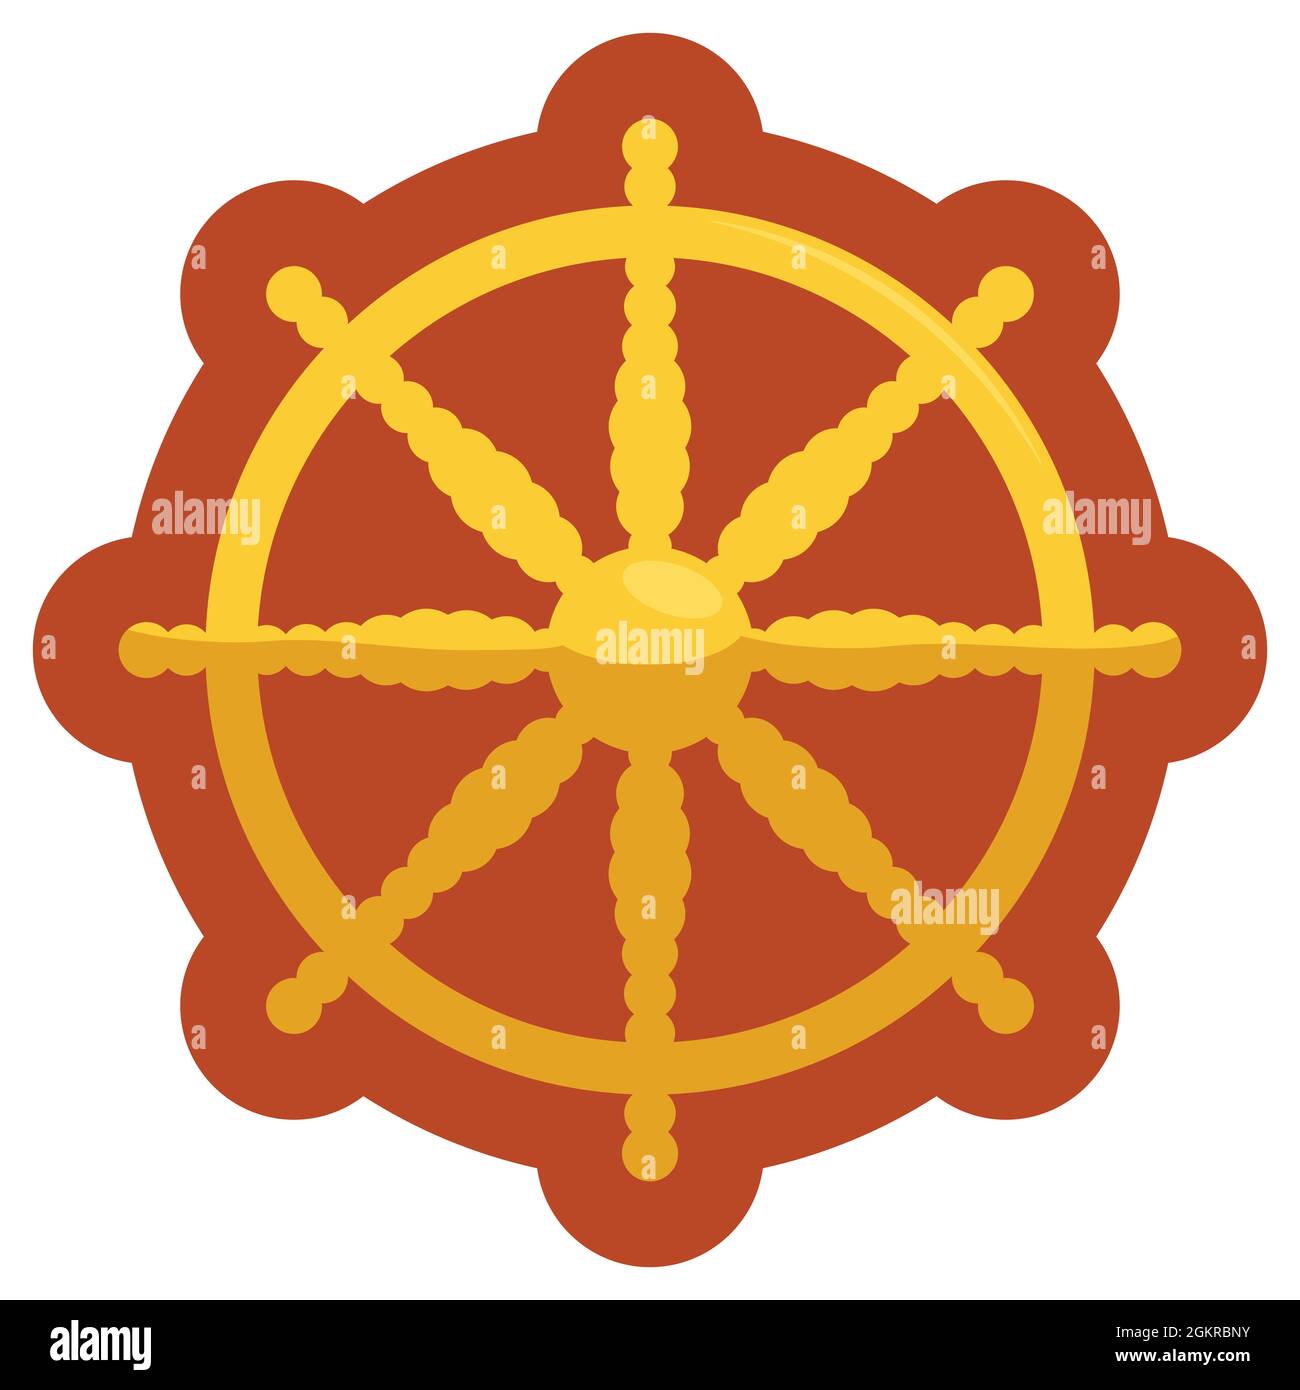 Isolated golden wheel of dharma -or dharmachakra- symbol with bold orange outline, over white background. Stock Vector